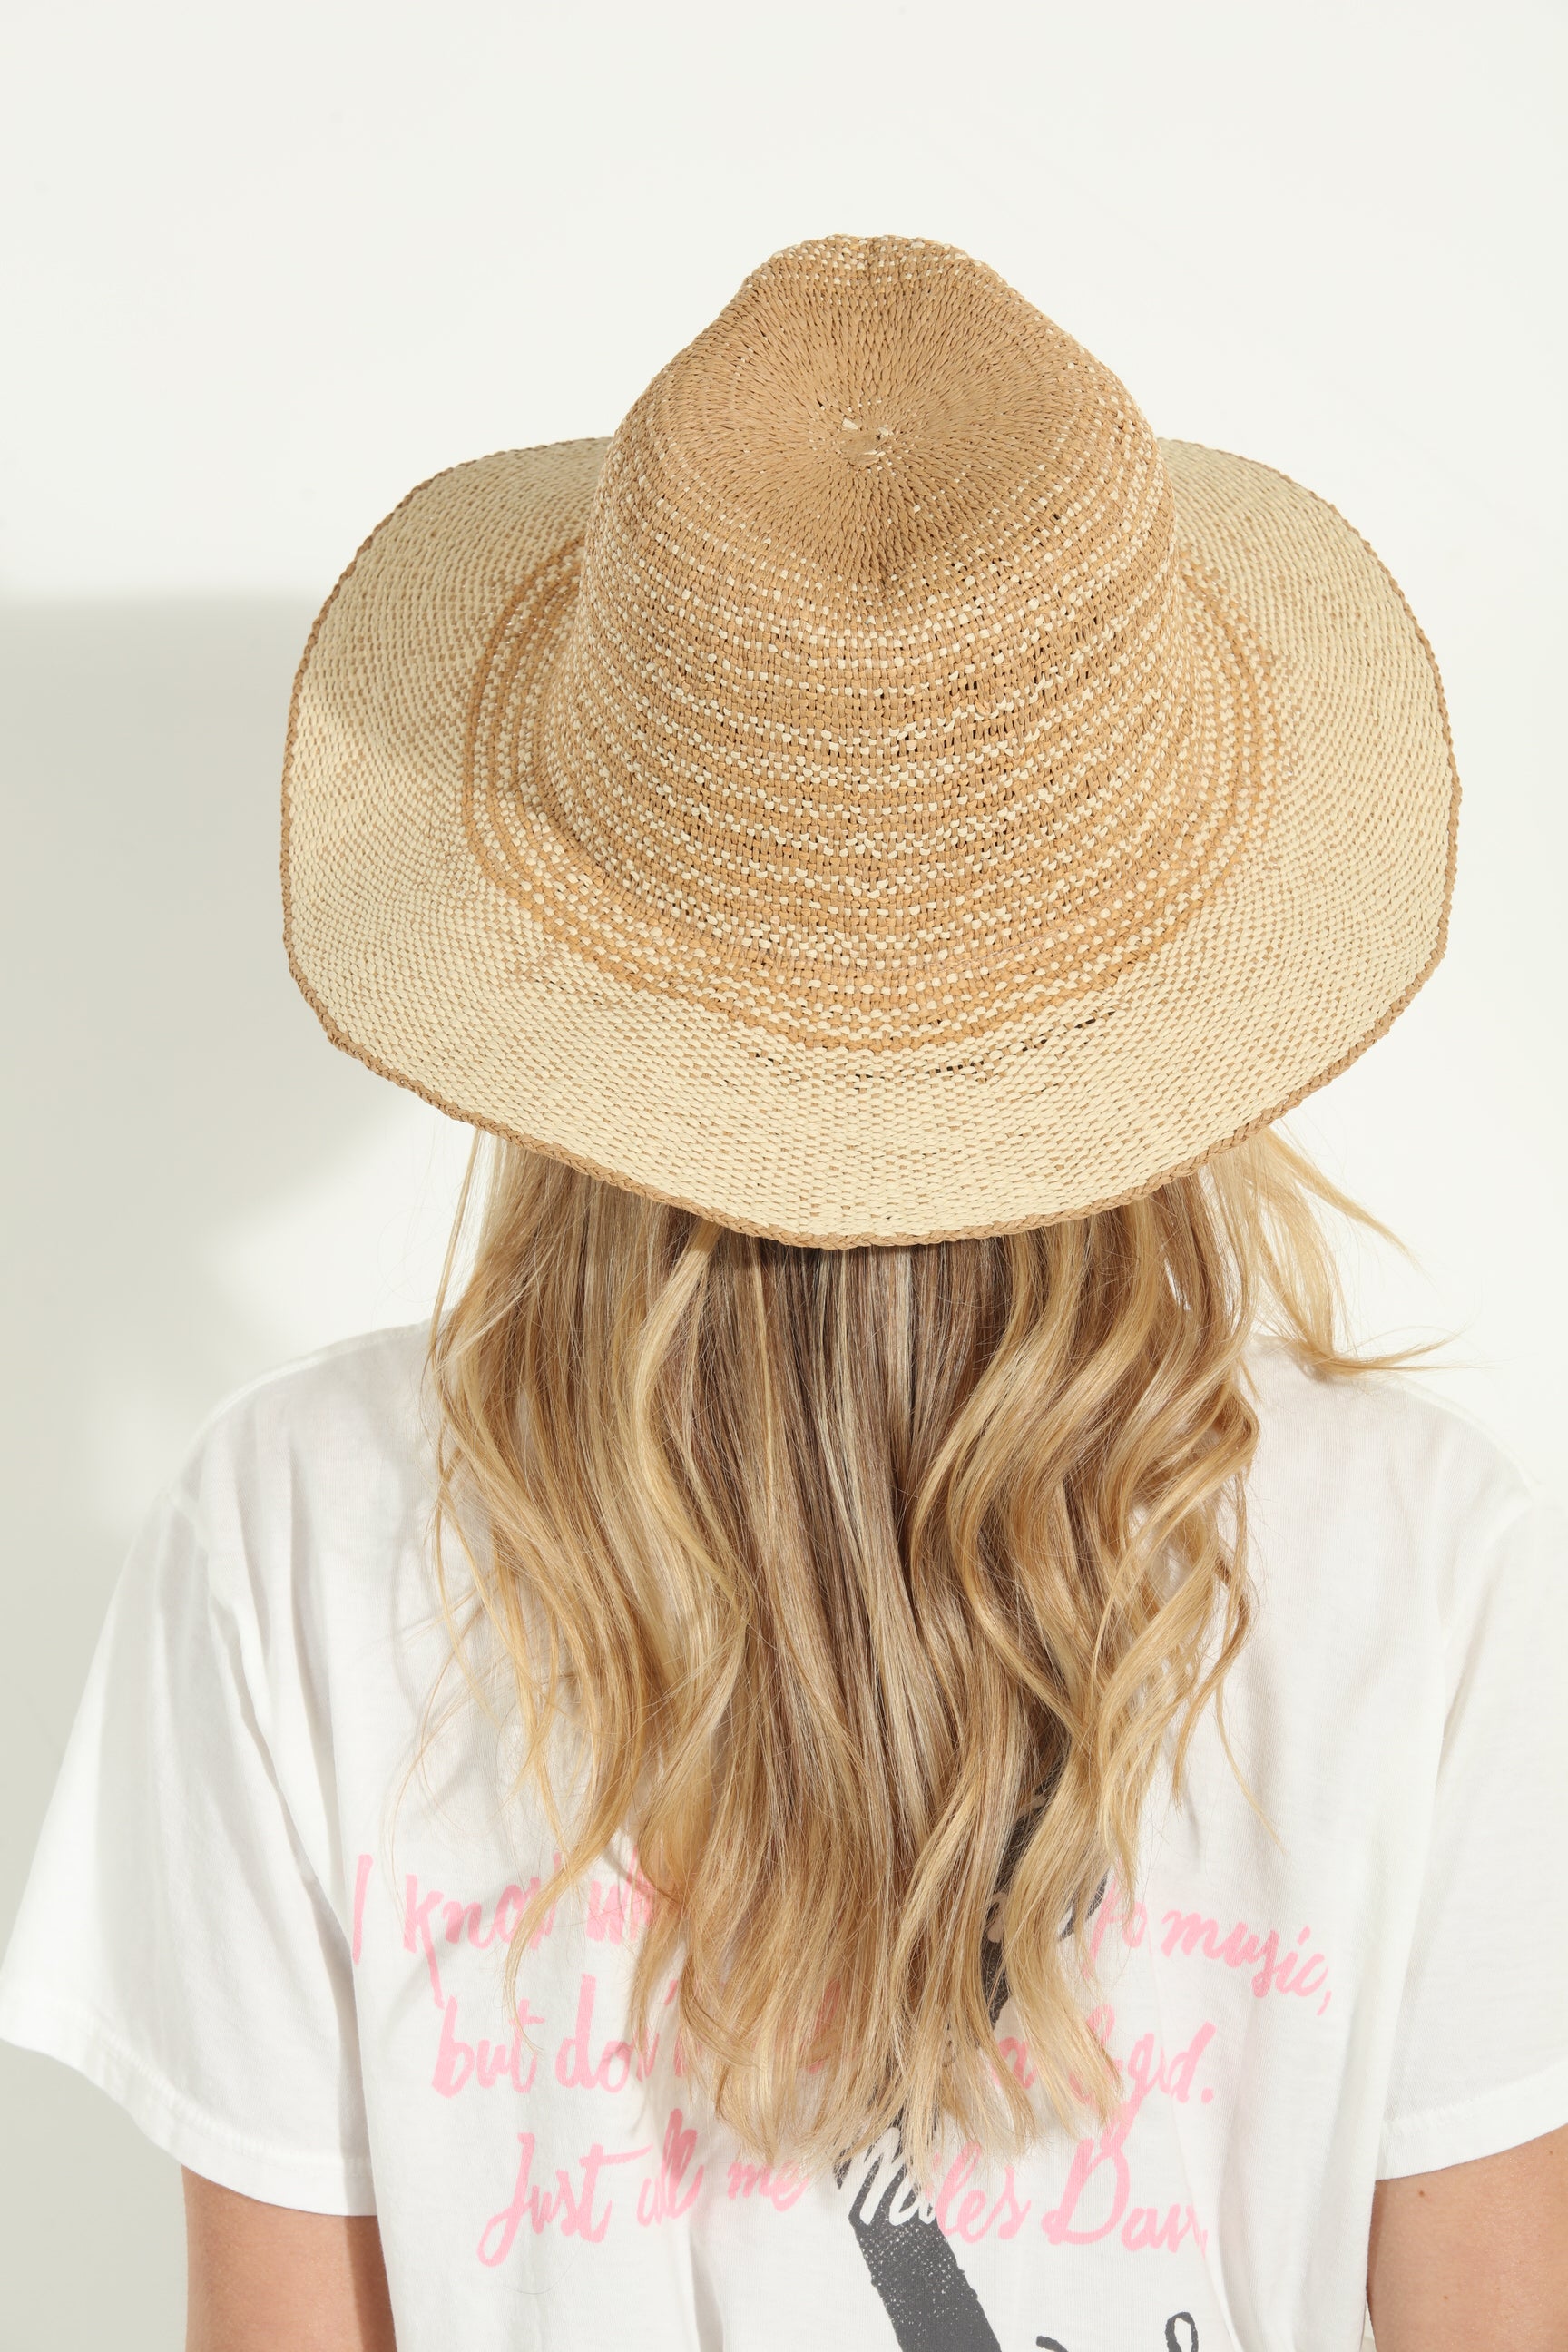 Two-Toned Woven Sun Hat